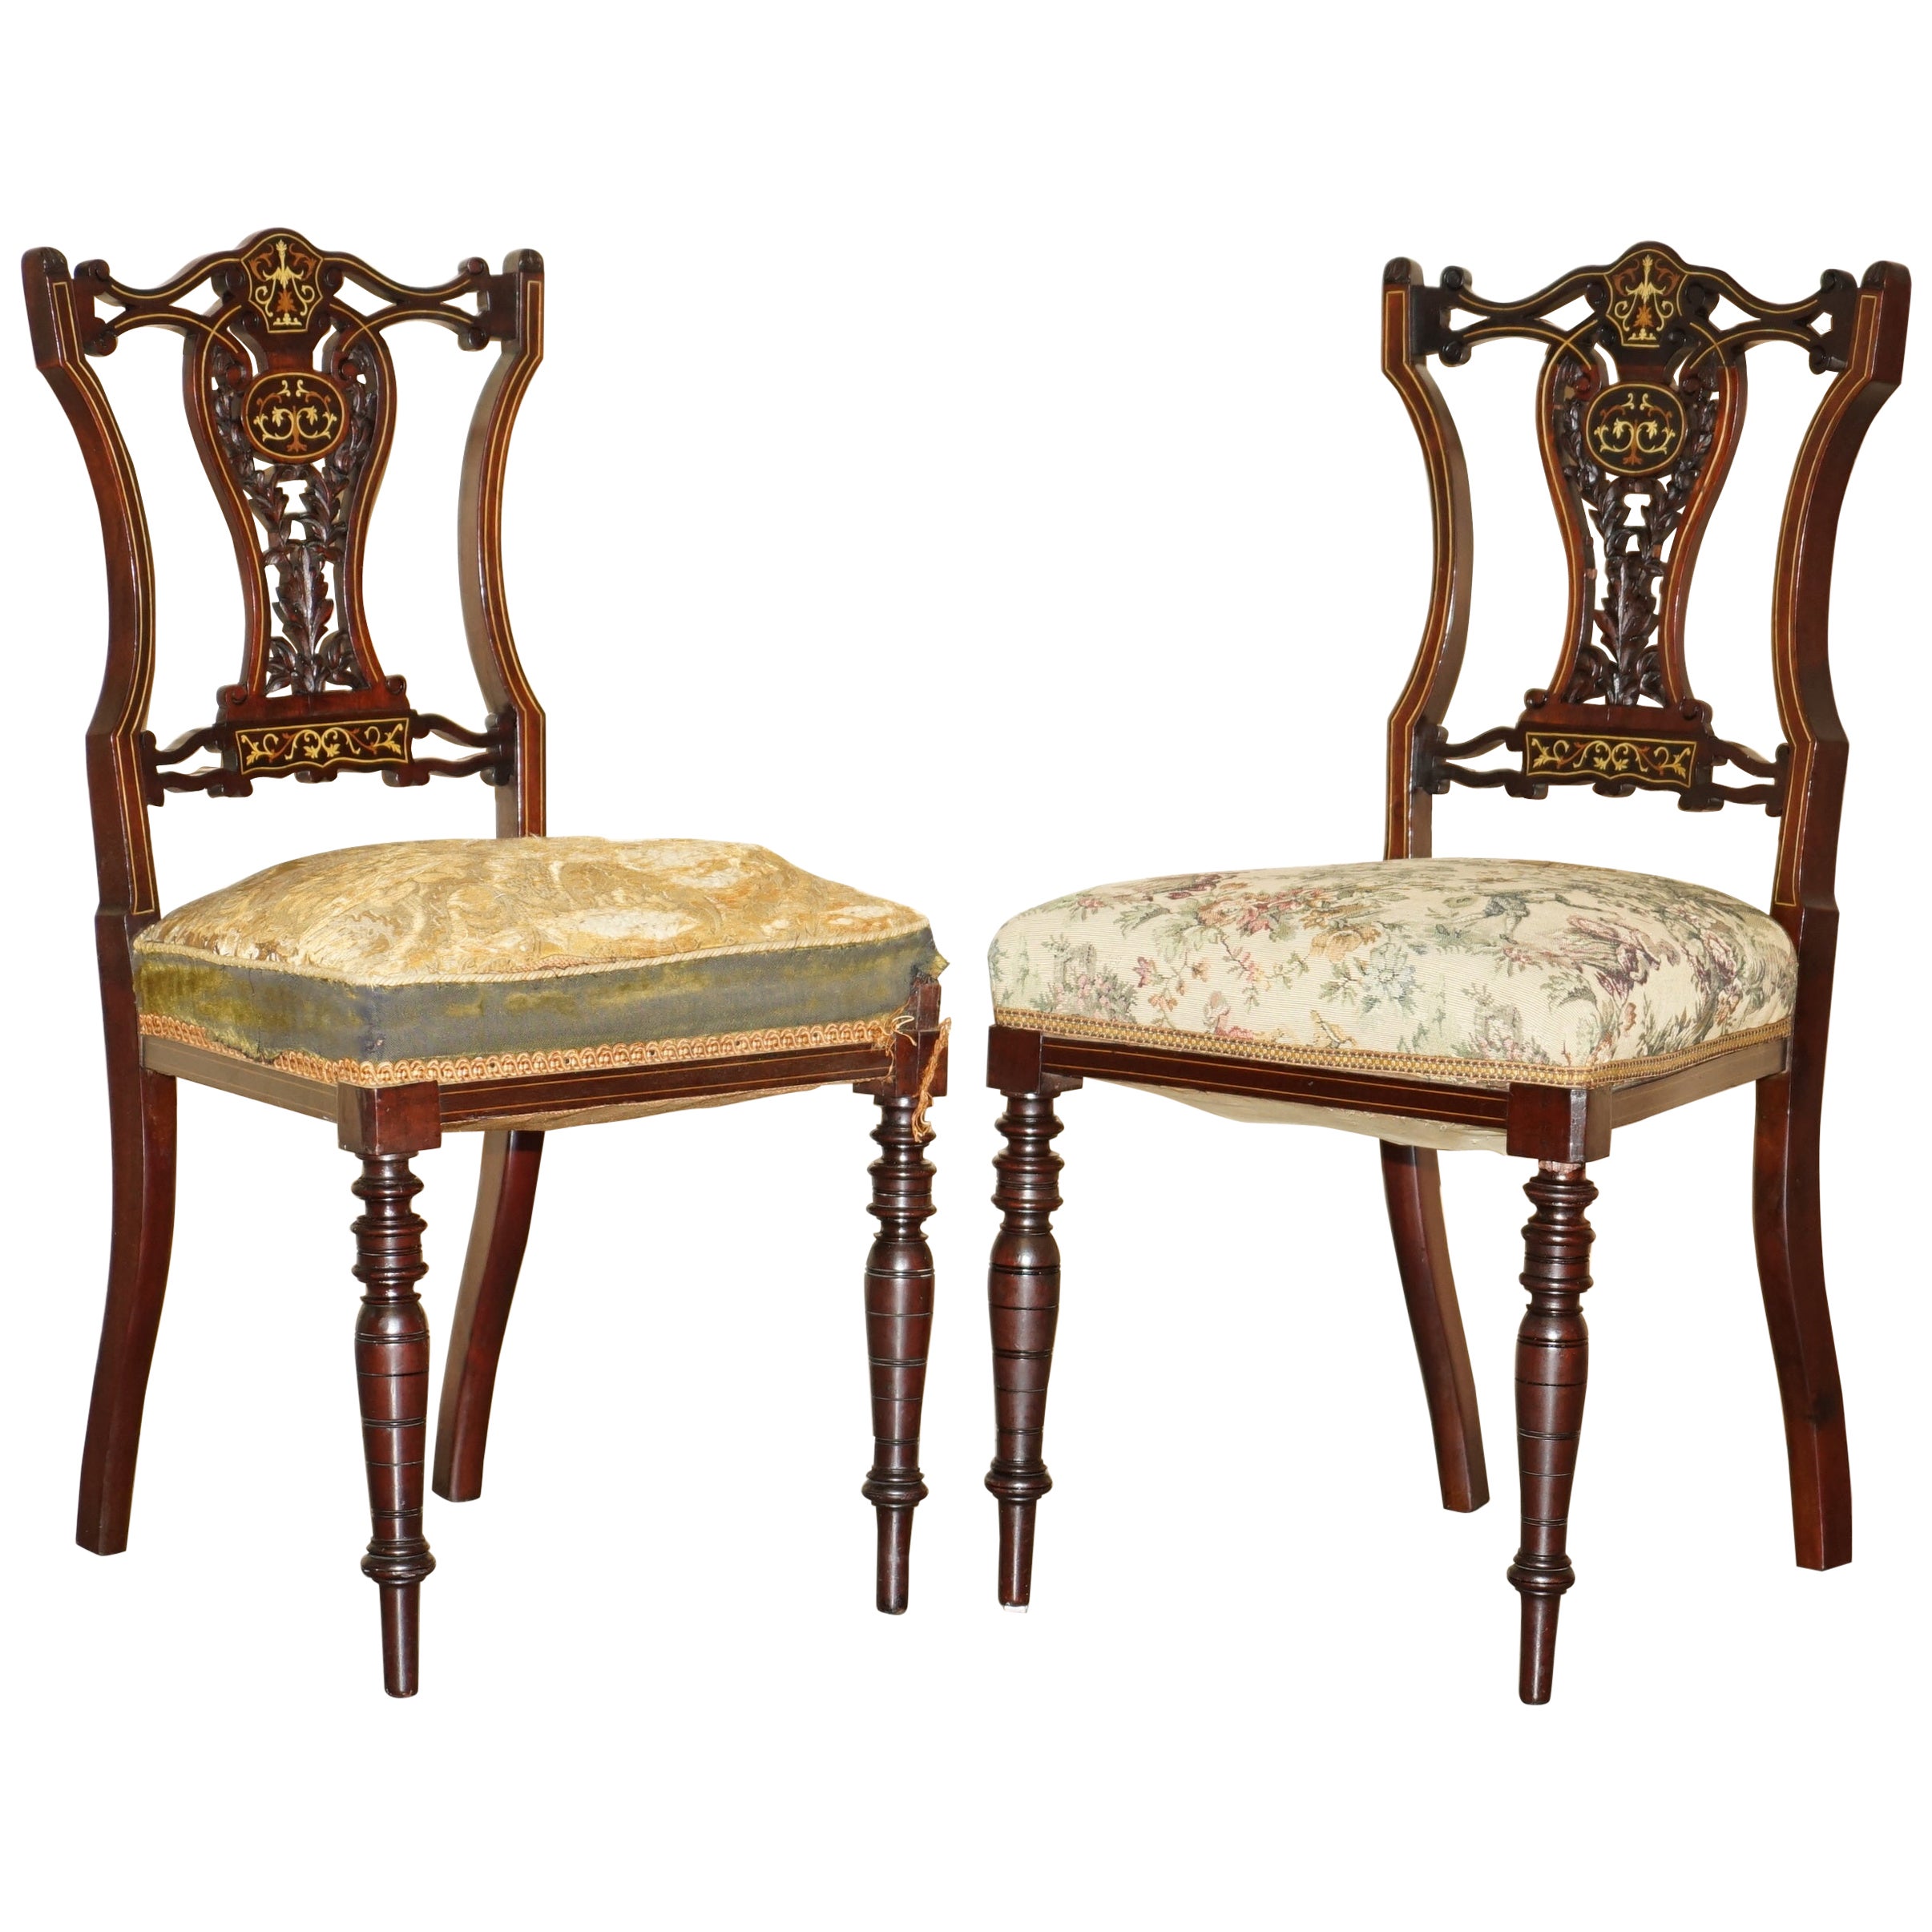 PAiR OF ANTIQUE VICTORIAN HARDWOOD SALON CHAIRS WITH STUNNING INLAID BACK PANELS For Sale